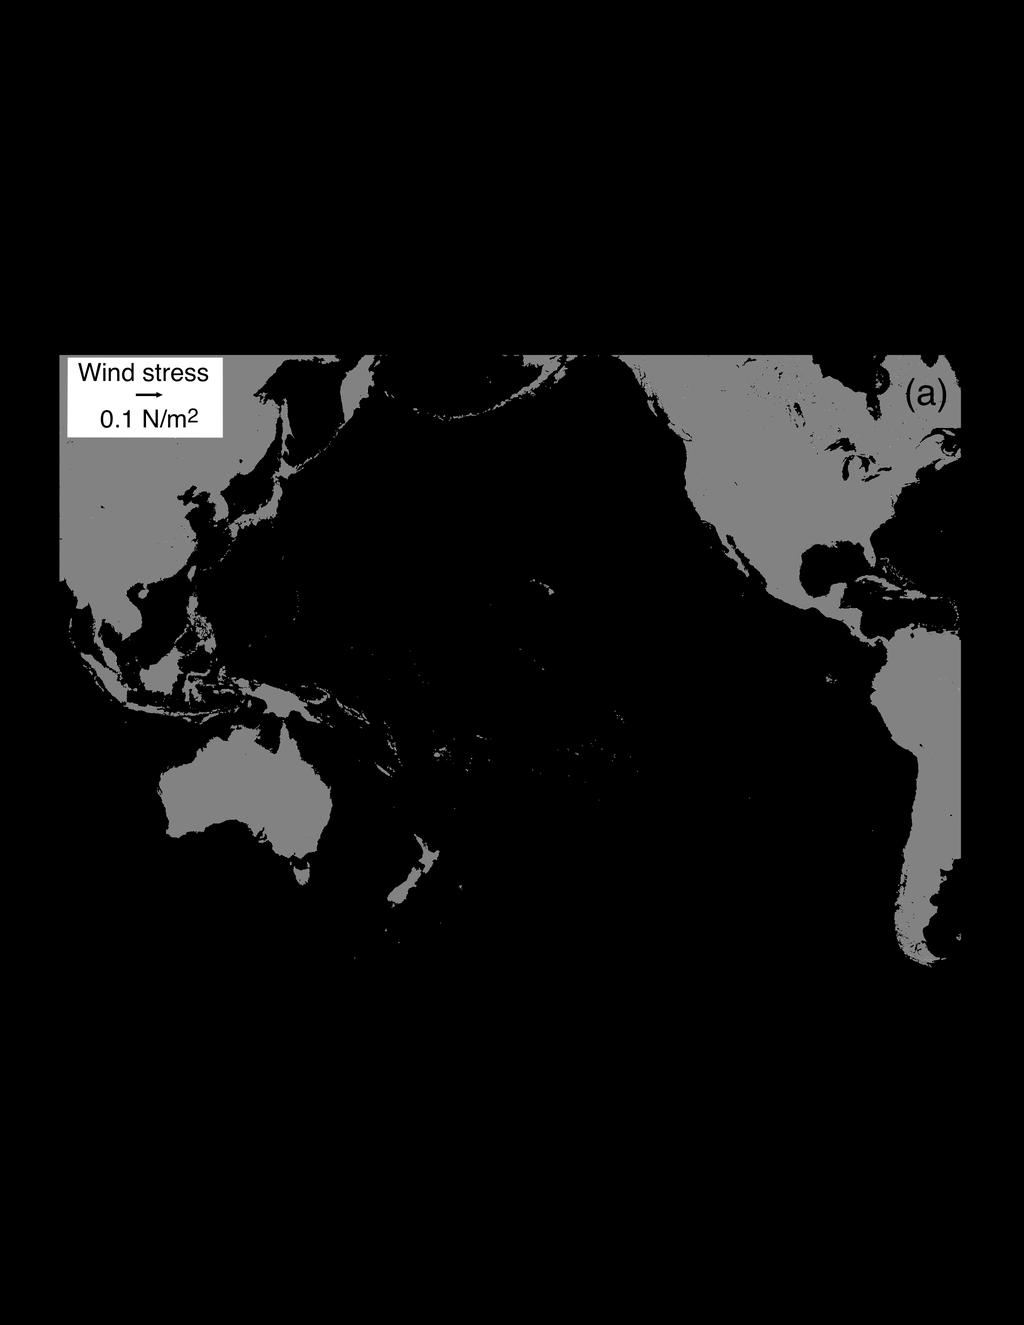 (c) Find a vertical section of potential temperature at 30S in the Indian Ocean (textbook or online atlases). What is the approximate depth of water at 1 C and at 5 C in the Indian Ocean?